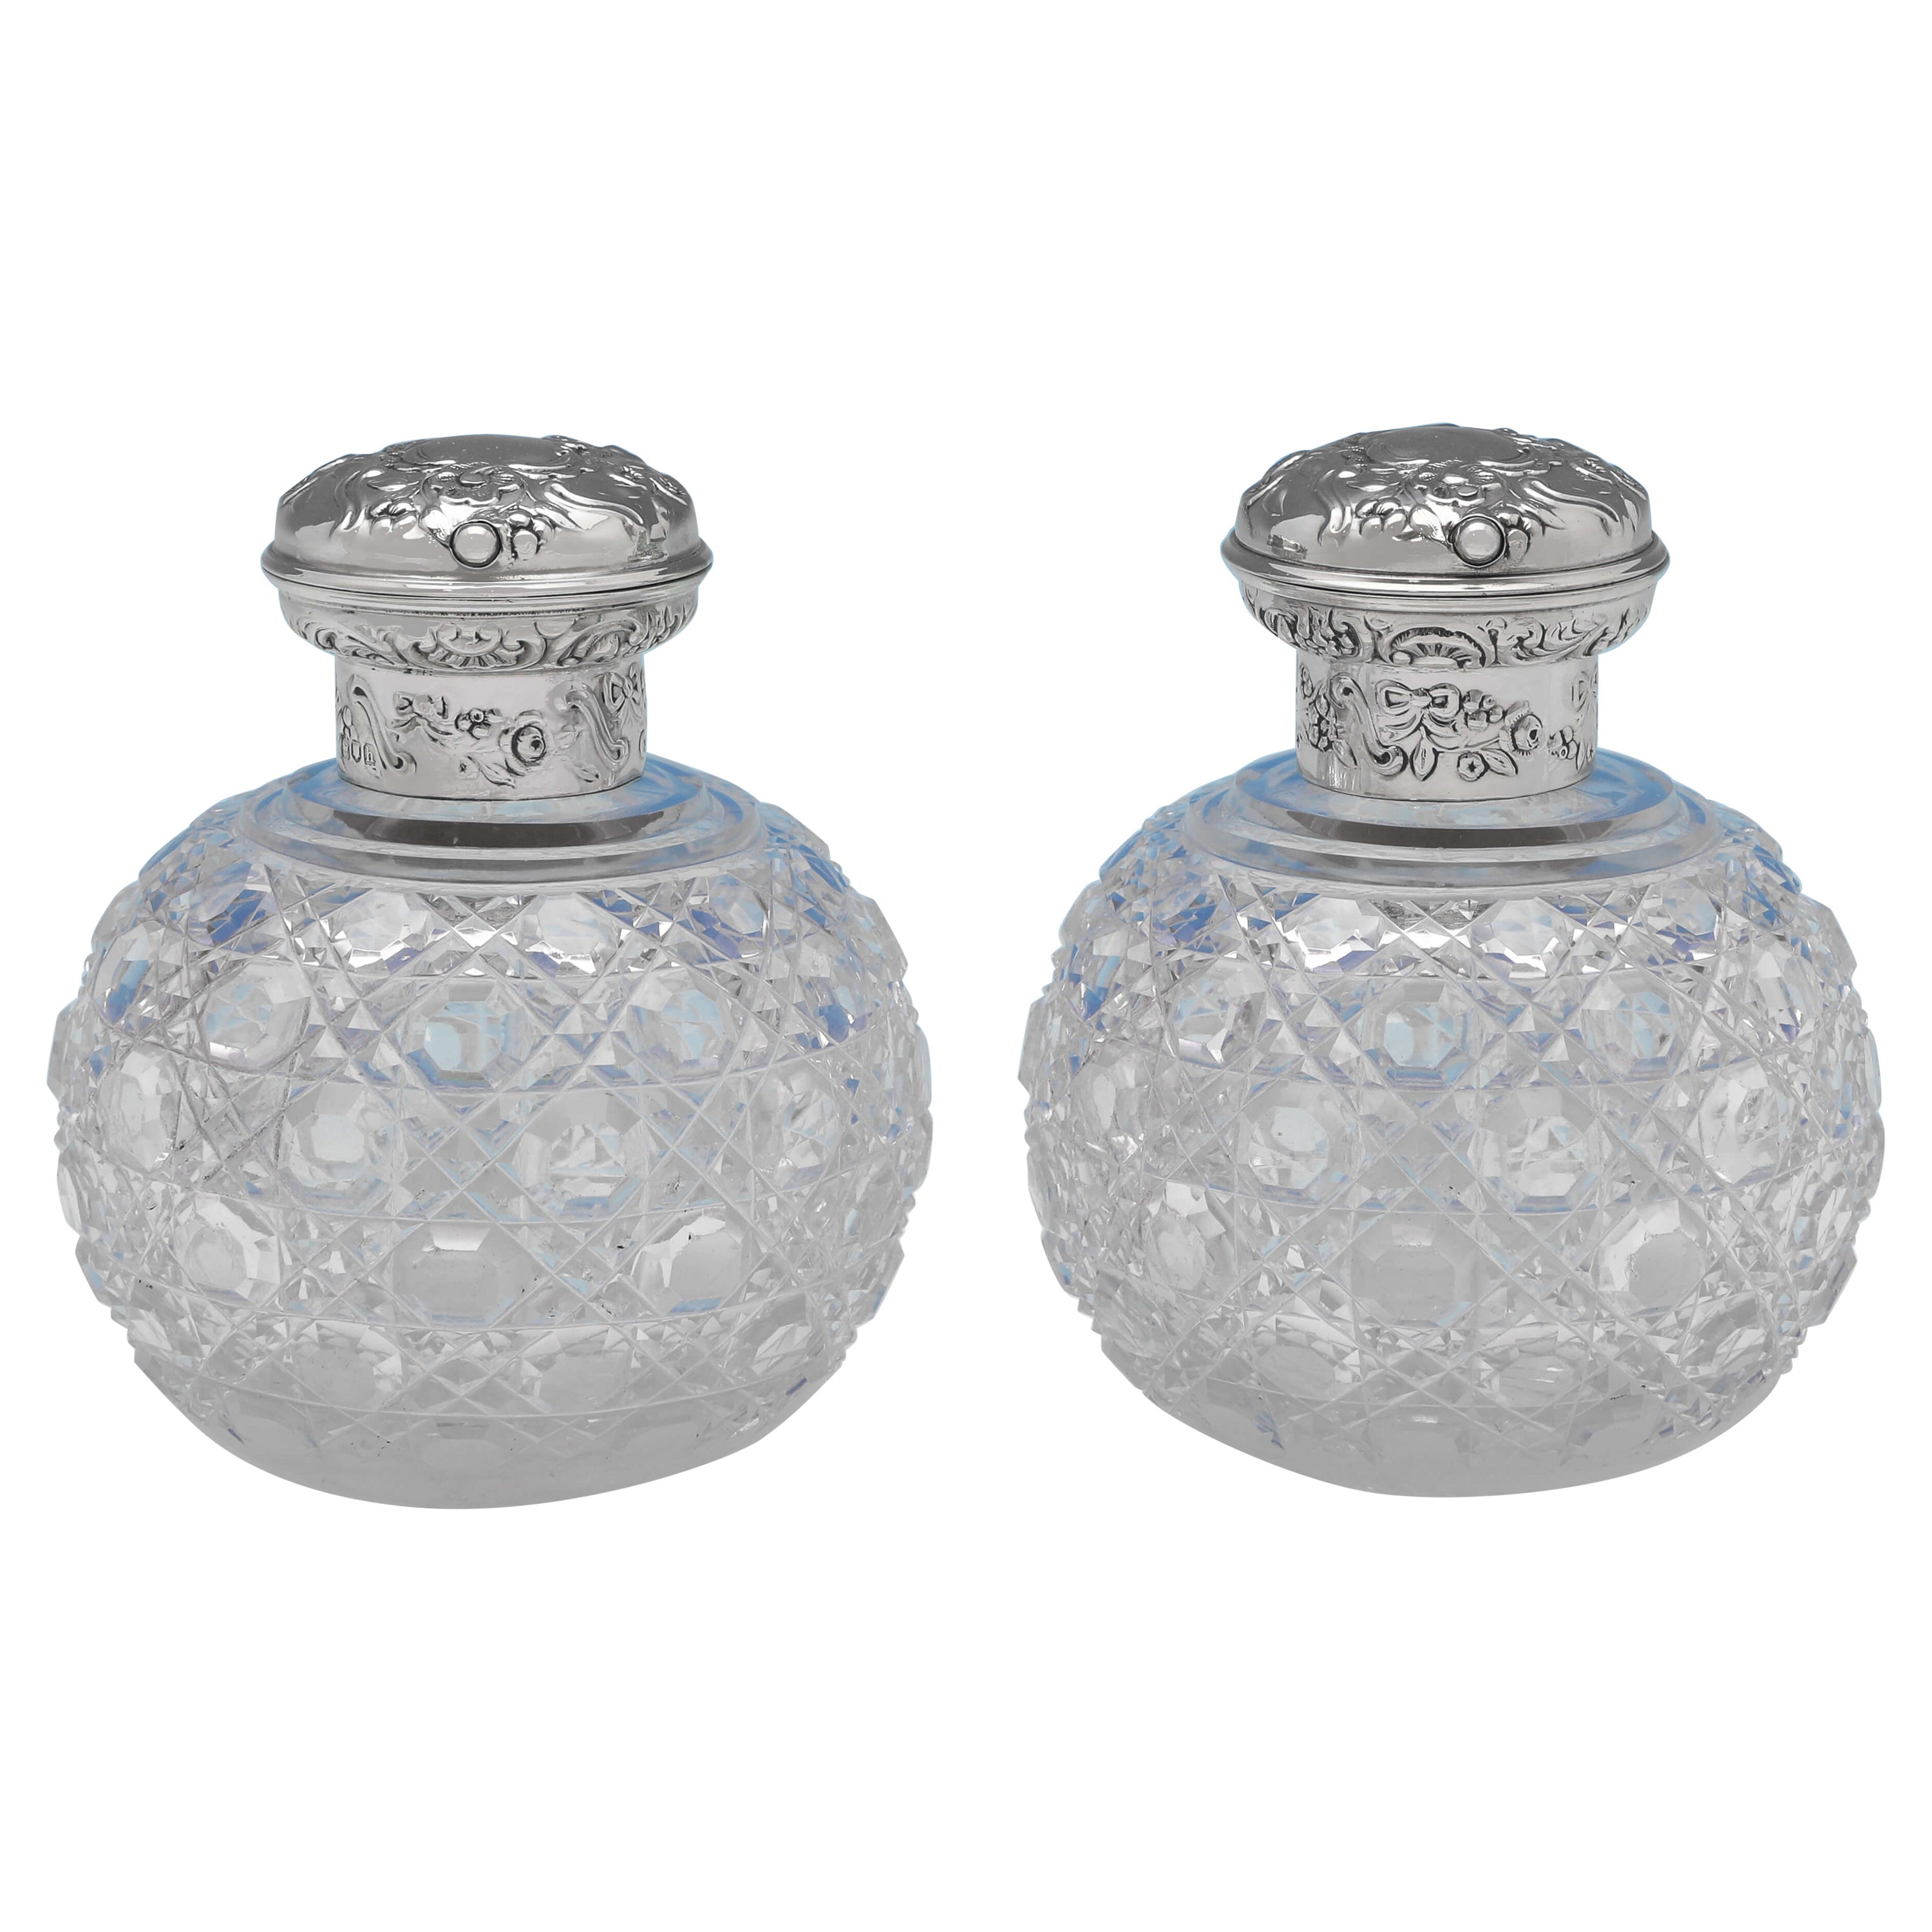 Edwardian Pair of Antique Sterling Silver Scent Bottles, William Comyns, 1903